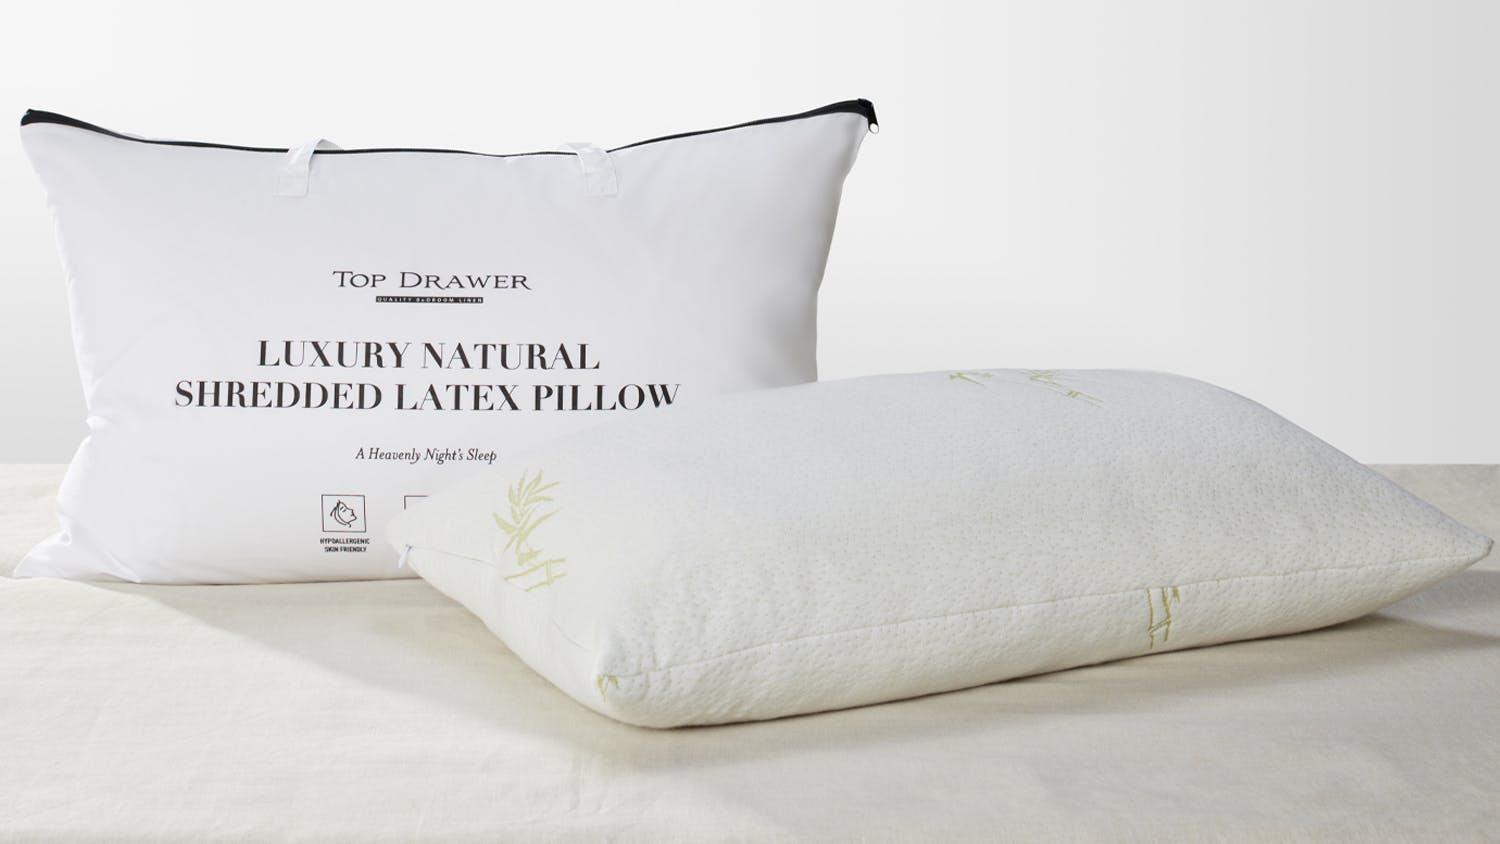 Shredded Latex Pillow by Top Drawer